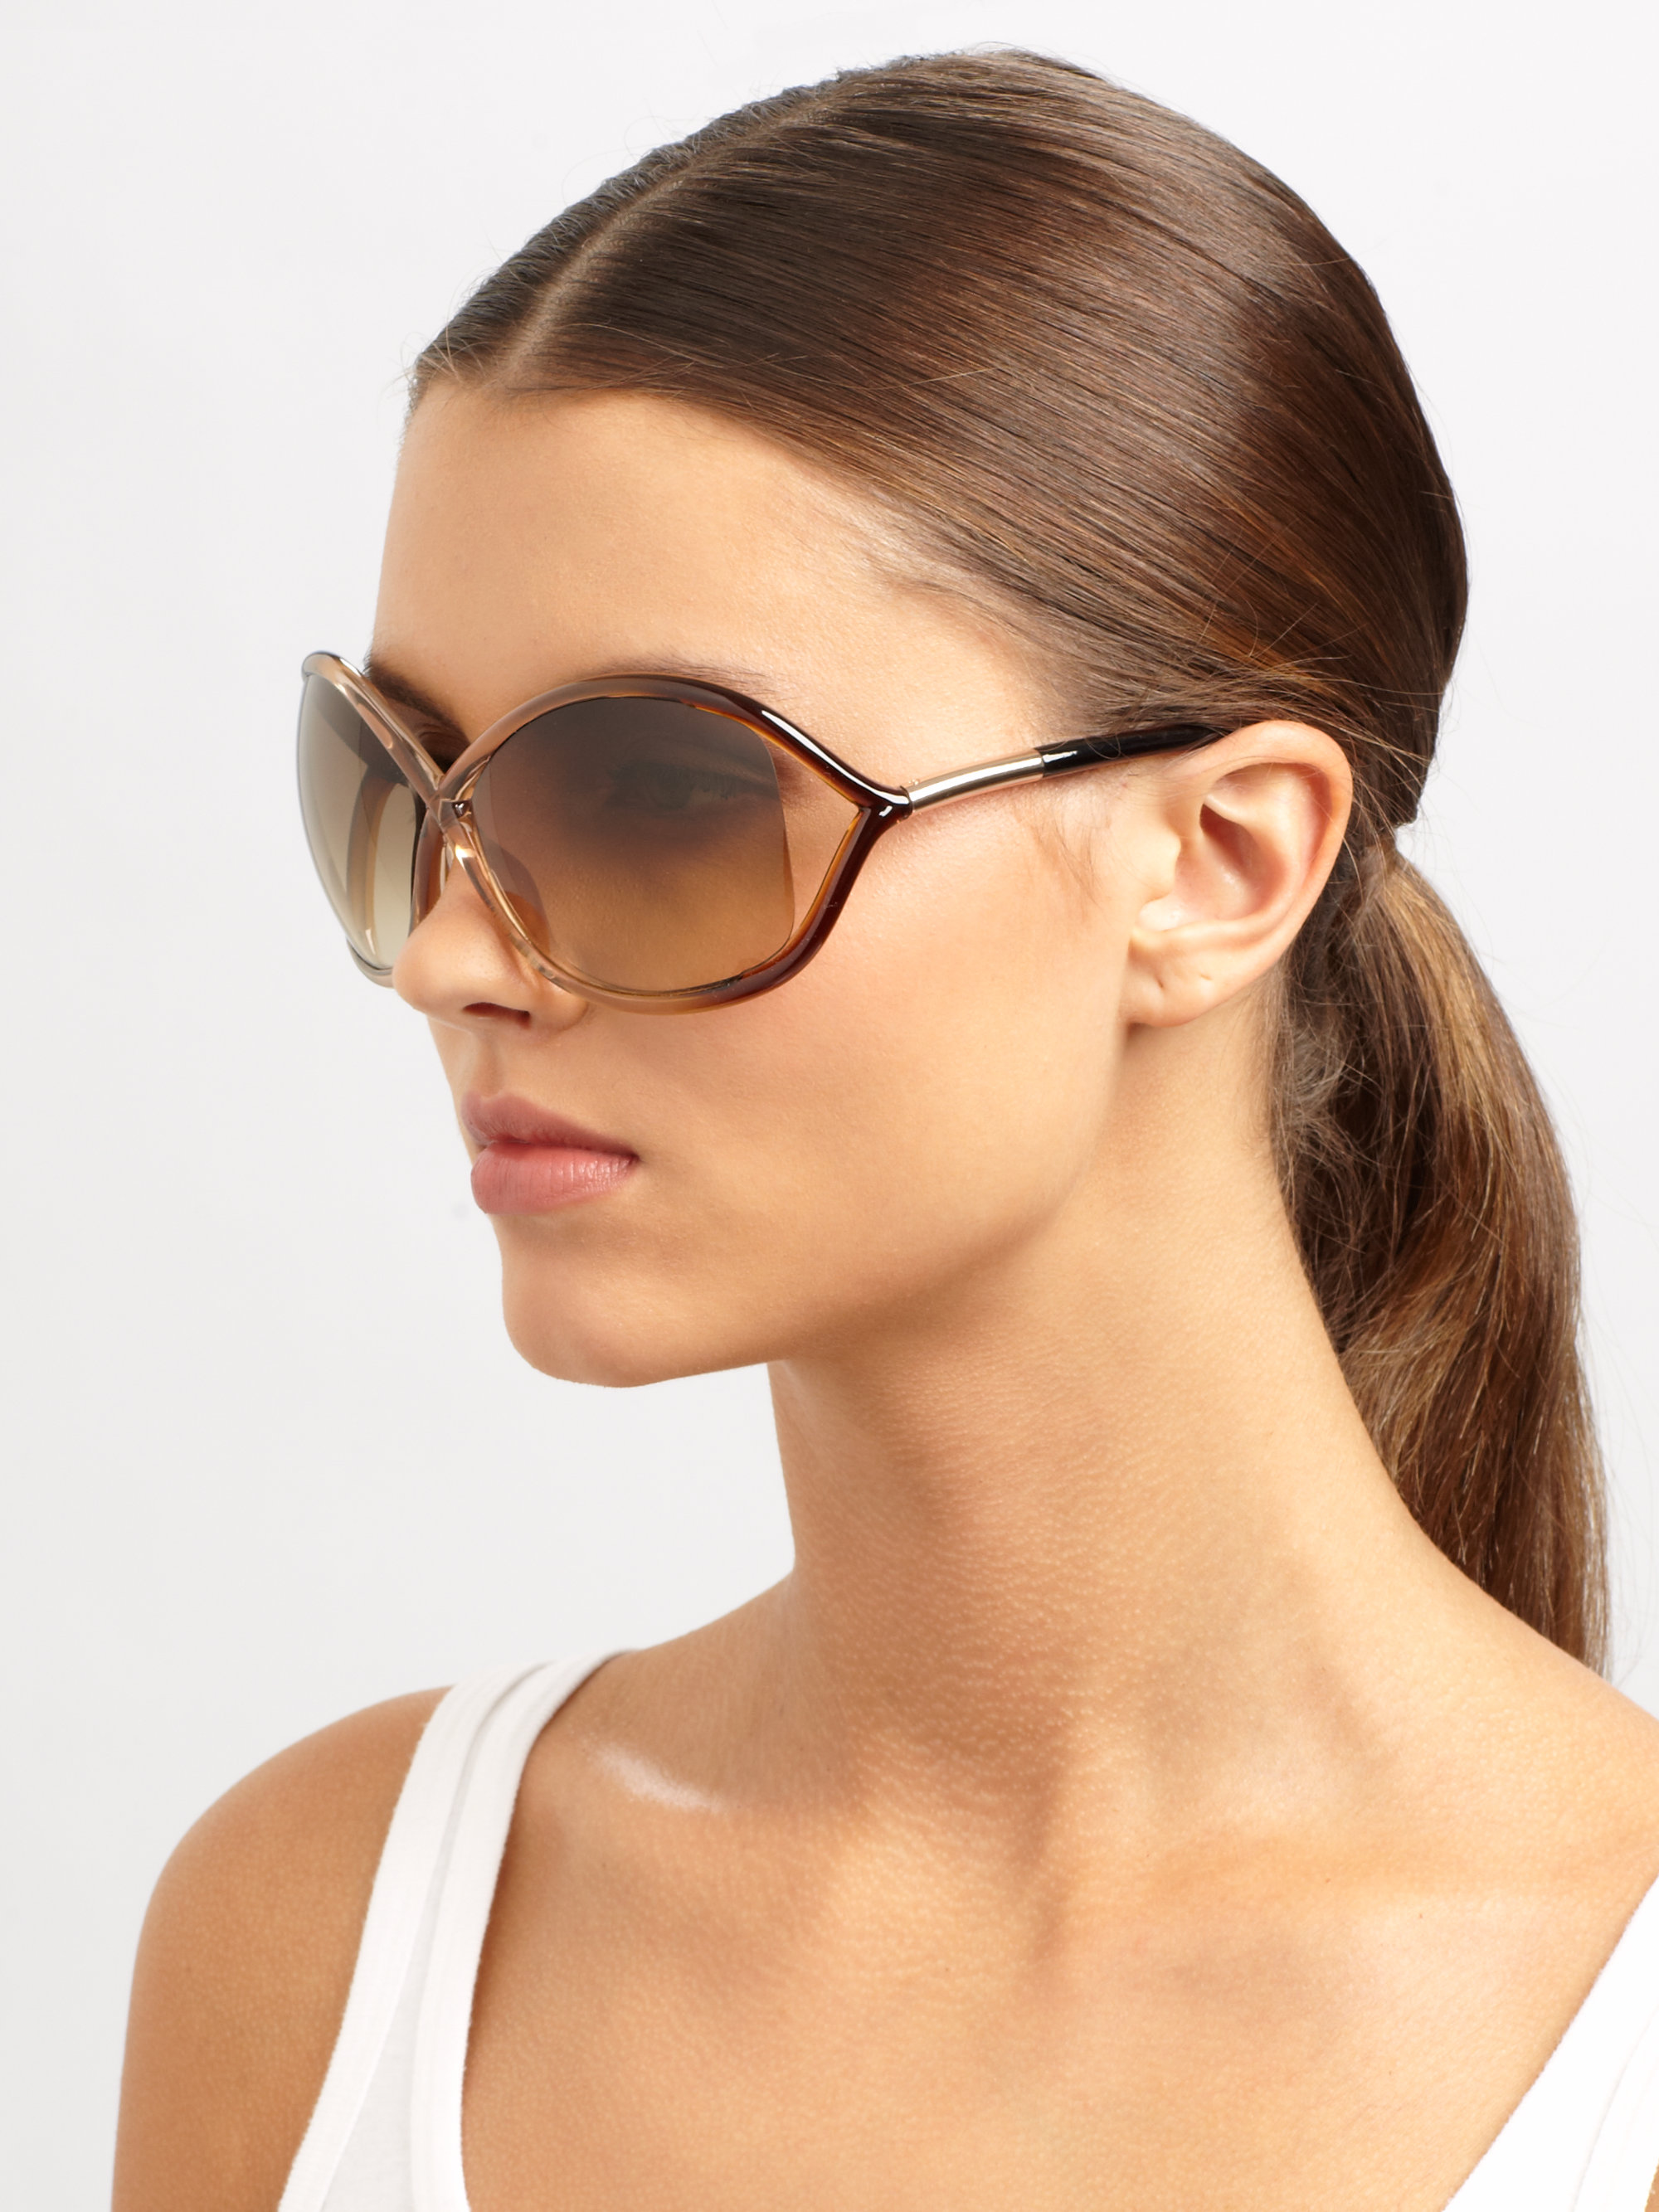 Lyst - Tom Ford Whitney 64mm Oversized Oval Sunglasses in Metallic